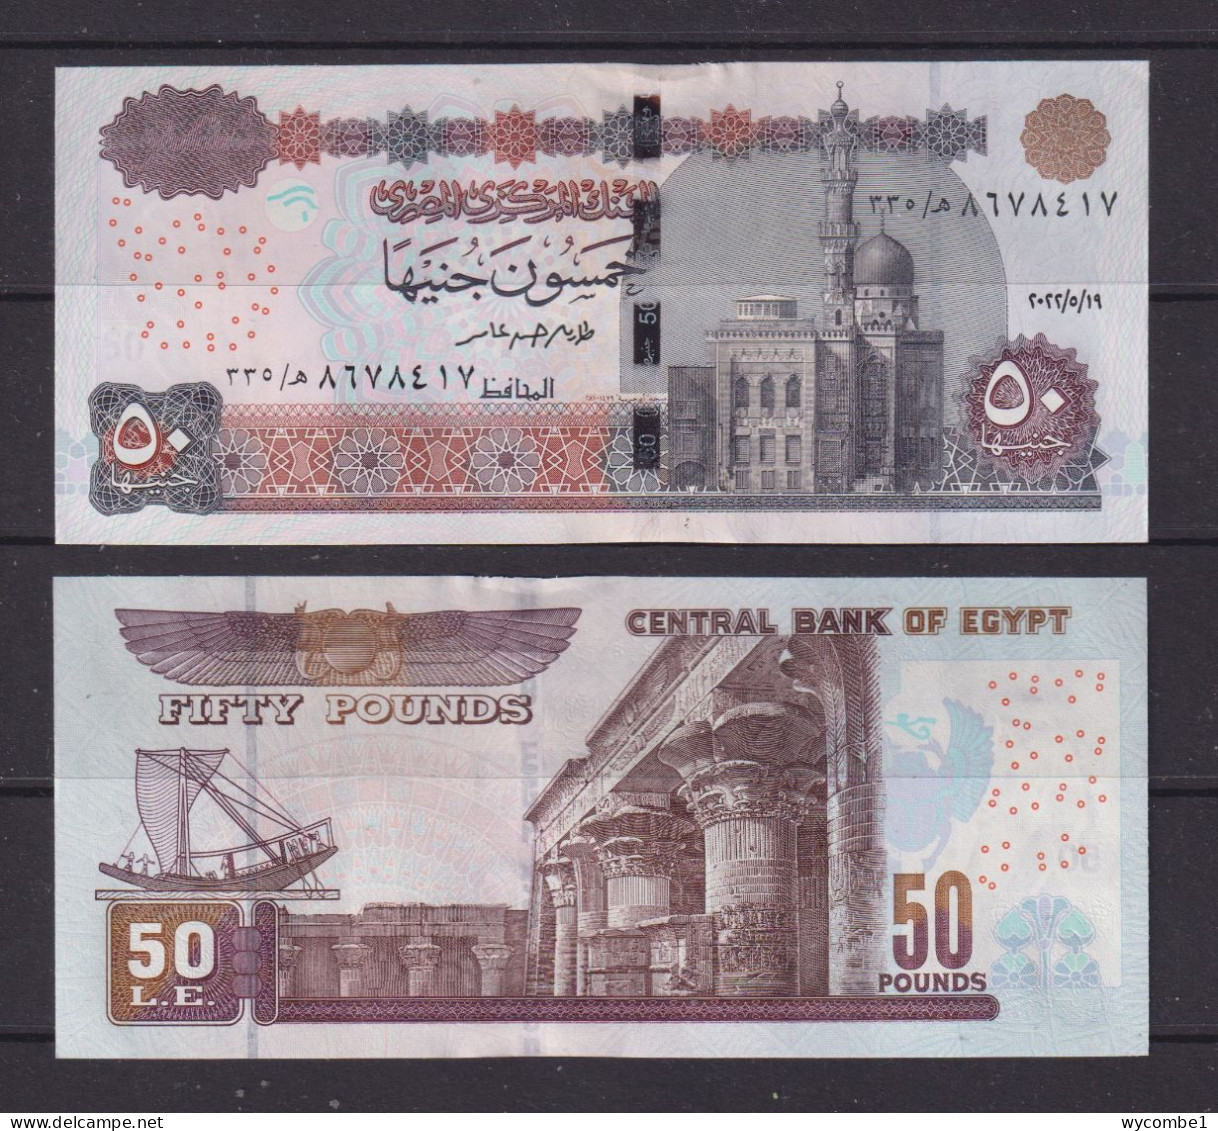 EGYPT - 2019 50 Pounds UNC Banknote (Has The Usual Guillotine Kink At Top Of Metal Thread) - Egypt